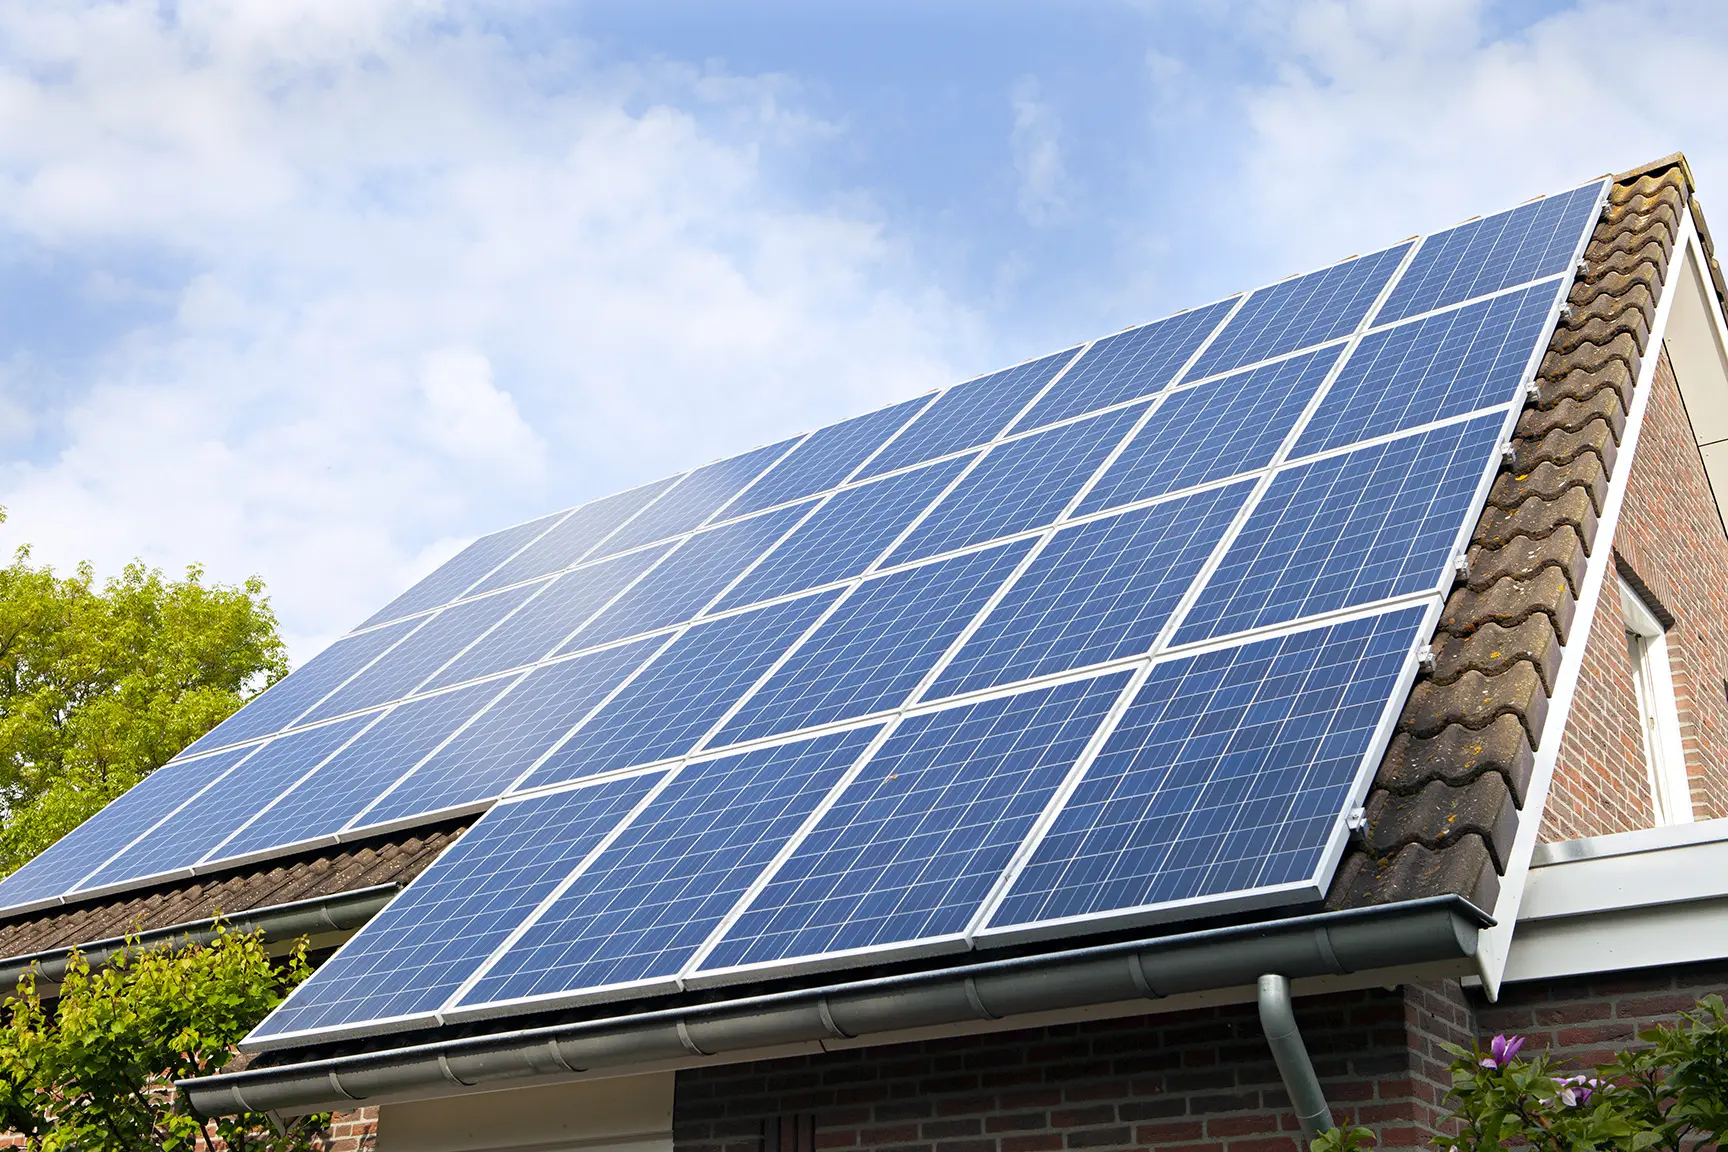 edison solar panels - What is a 12 month settlement bill from Edison